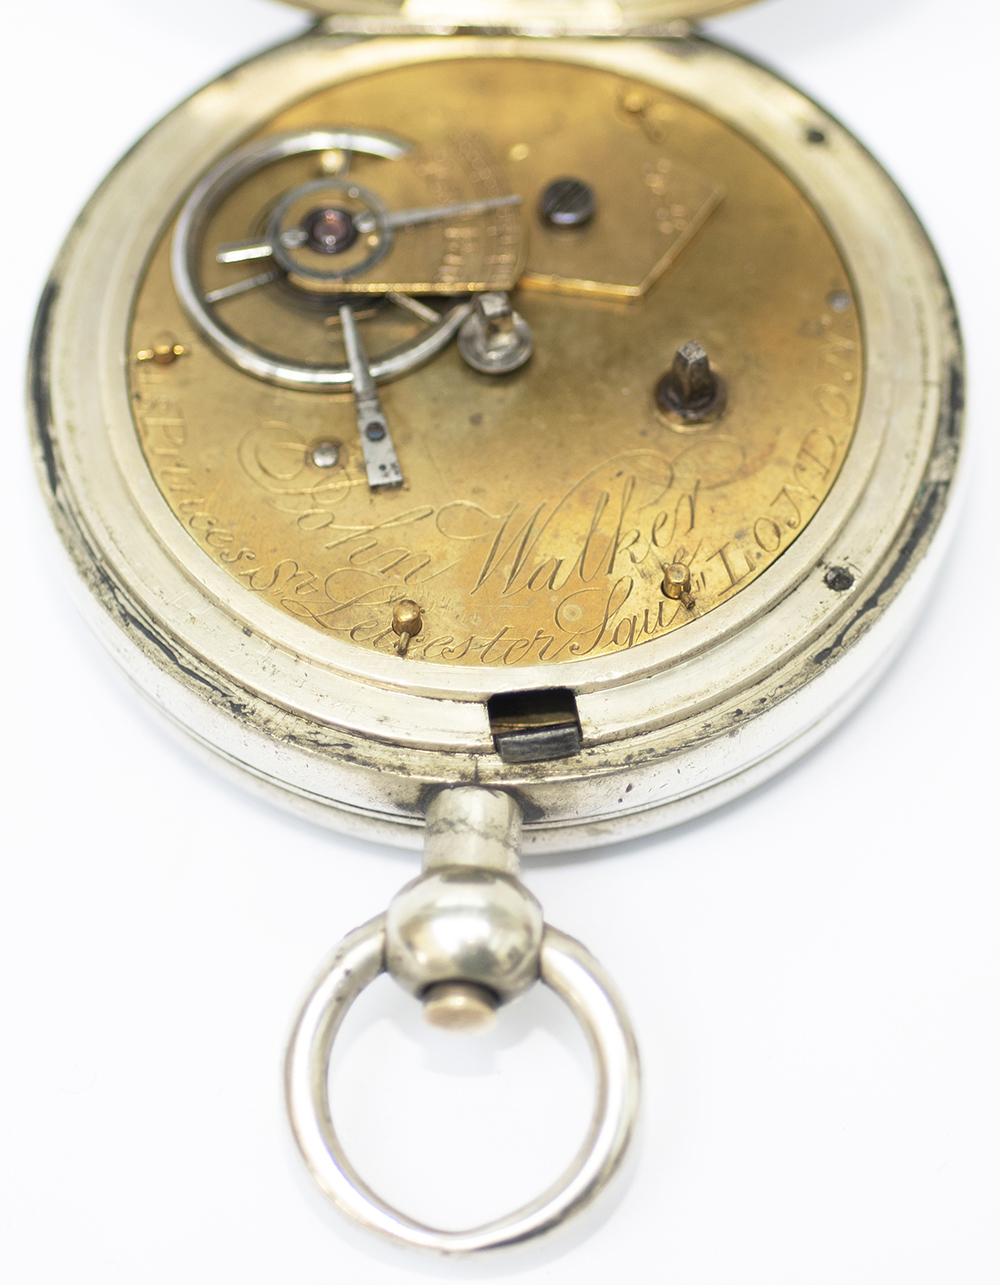 London & North Western Railway pre grouping nickel cased pocket watch with an English Lever fusee - Image 2 of 2